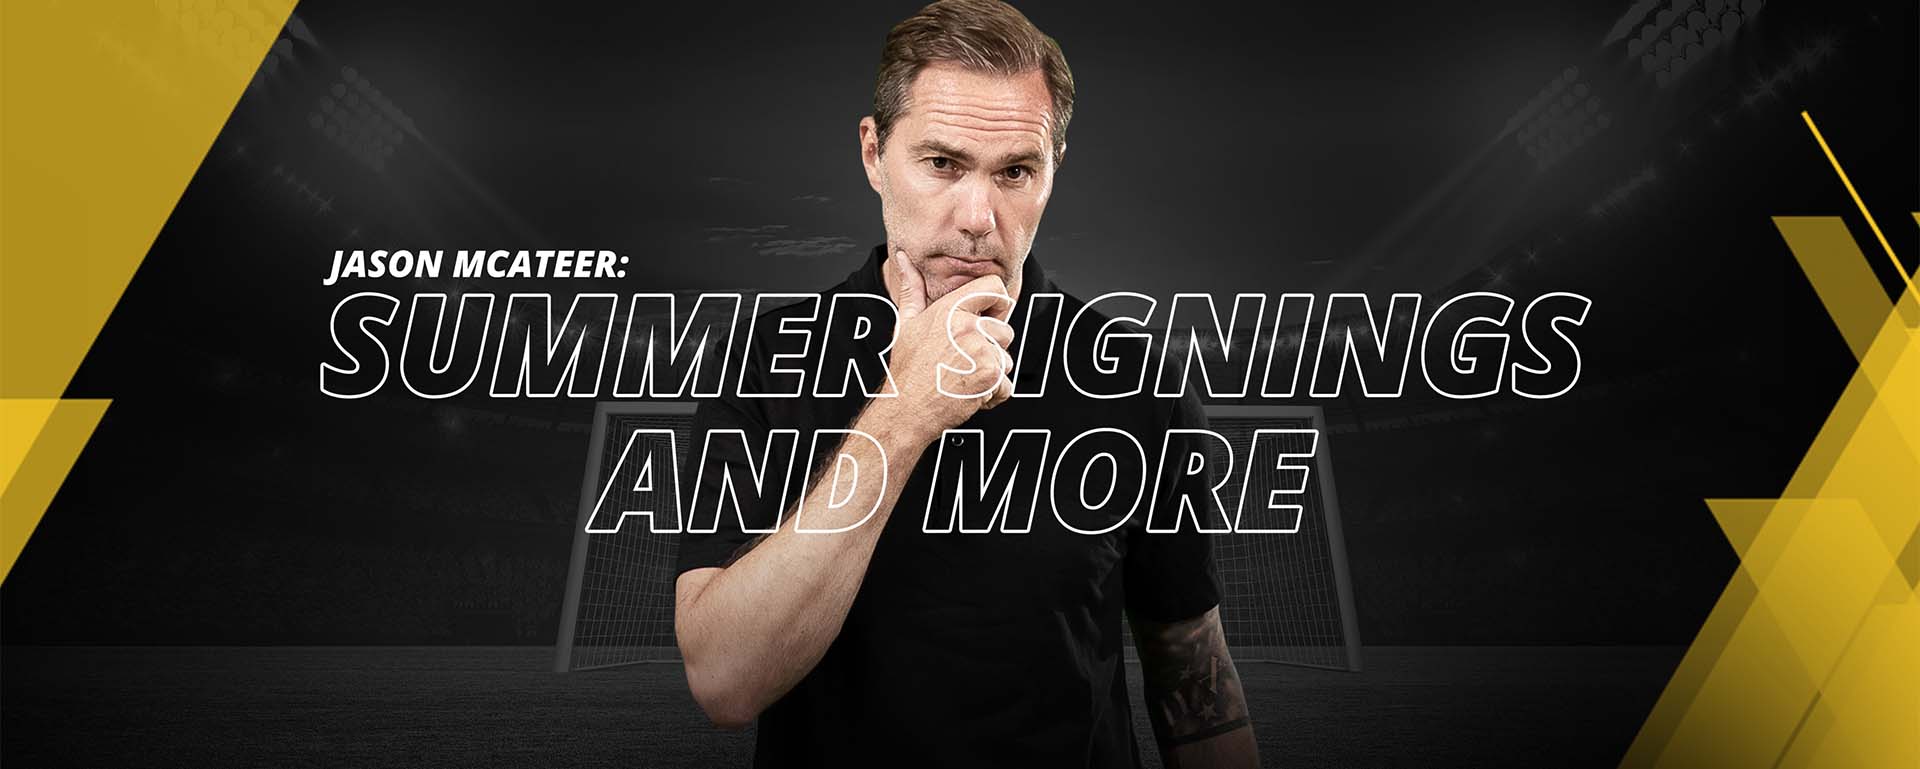 JASON MCATEER: SUMMER SIGNINGS AND MORE